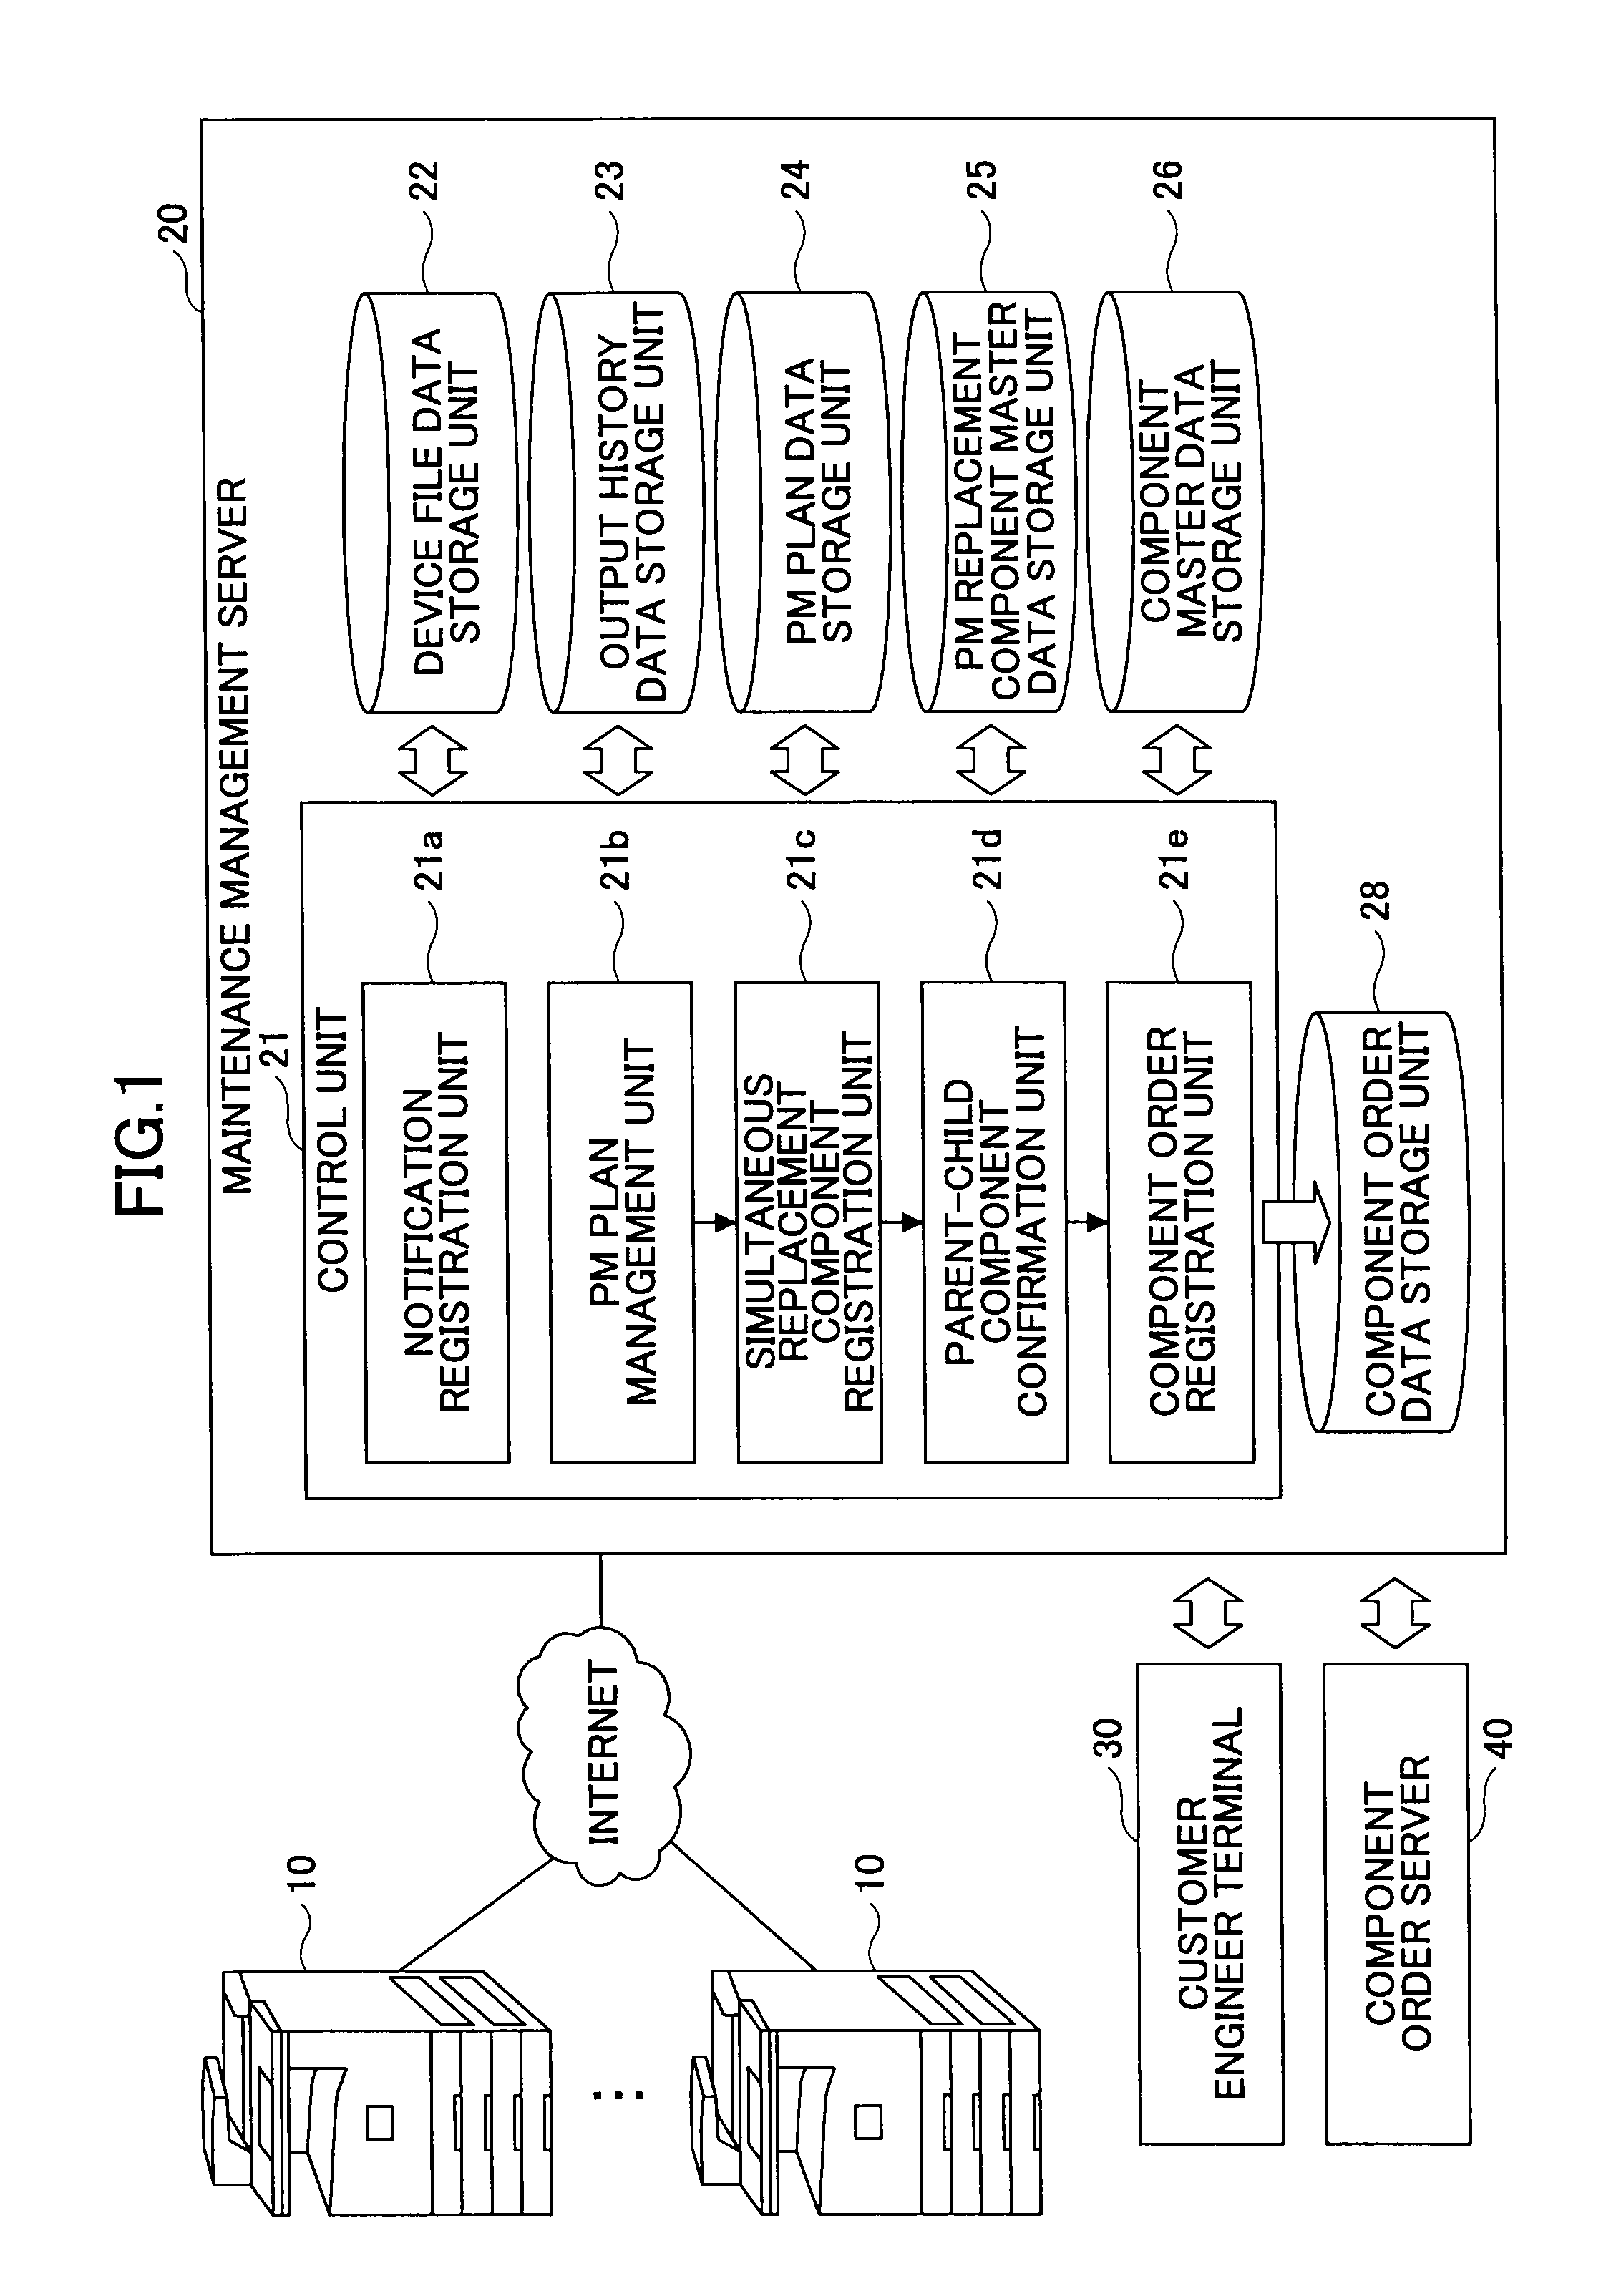 Maintenance management system and image forming apparatus